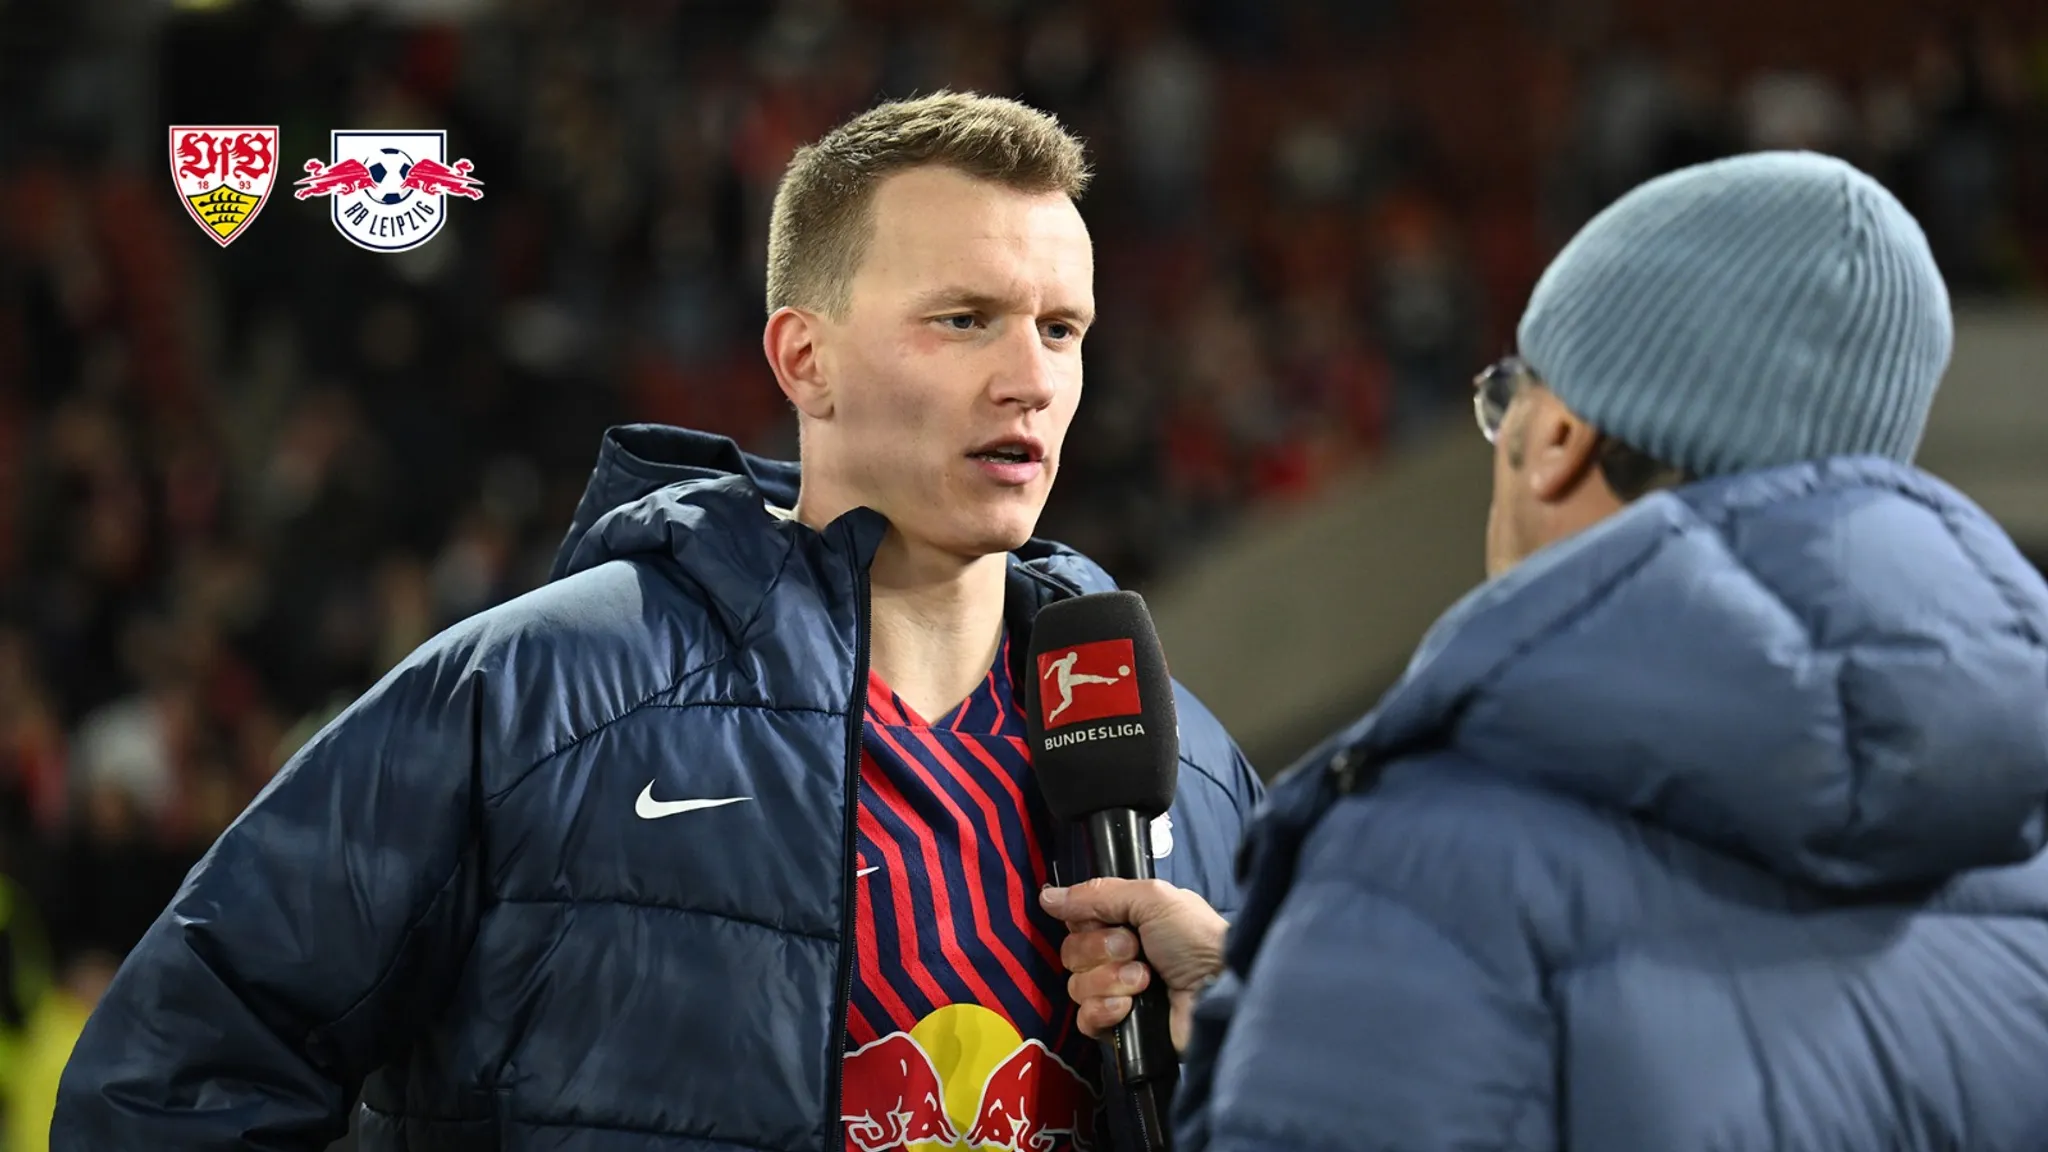 Lukas Klostermann speaks to the press after the defeat at VfB Stuttgart.